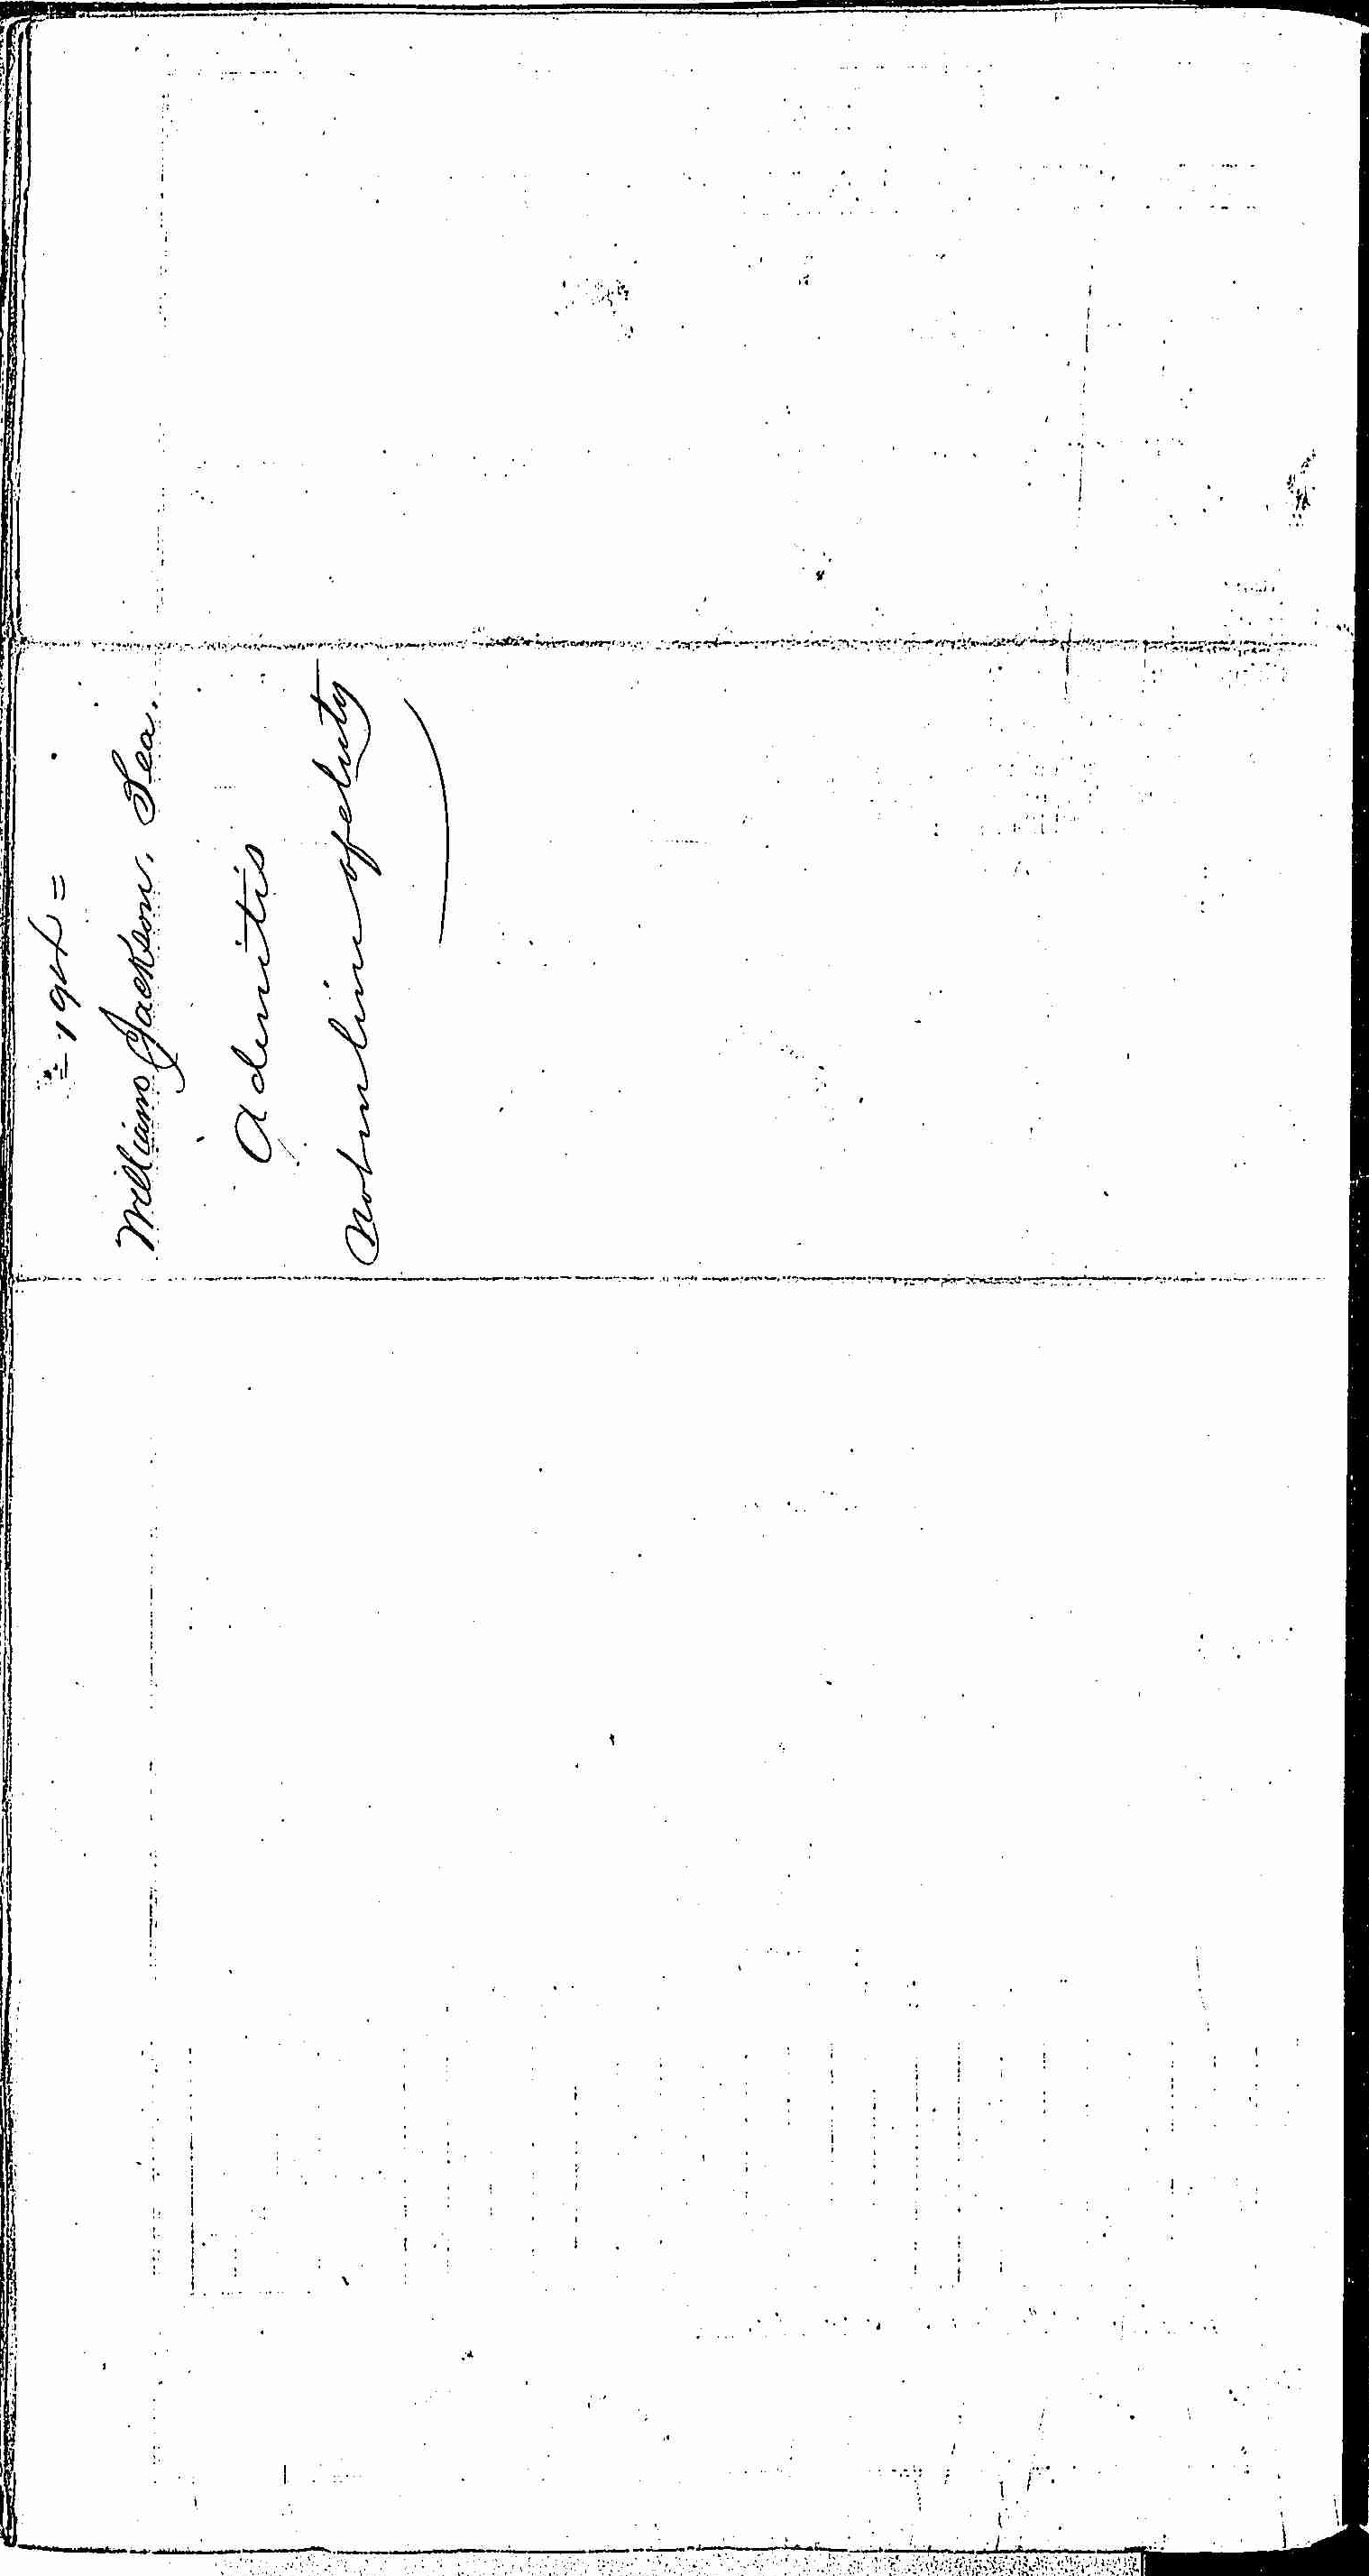 Entry for William Jackson (first admission page 2 of 2) in the log Hospital Tickets and Case Papers - Naval Hospital - Washington, D.C. - 1866-68